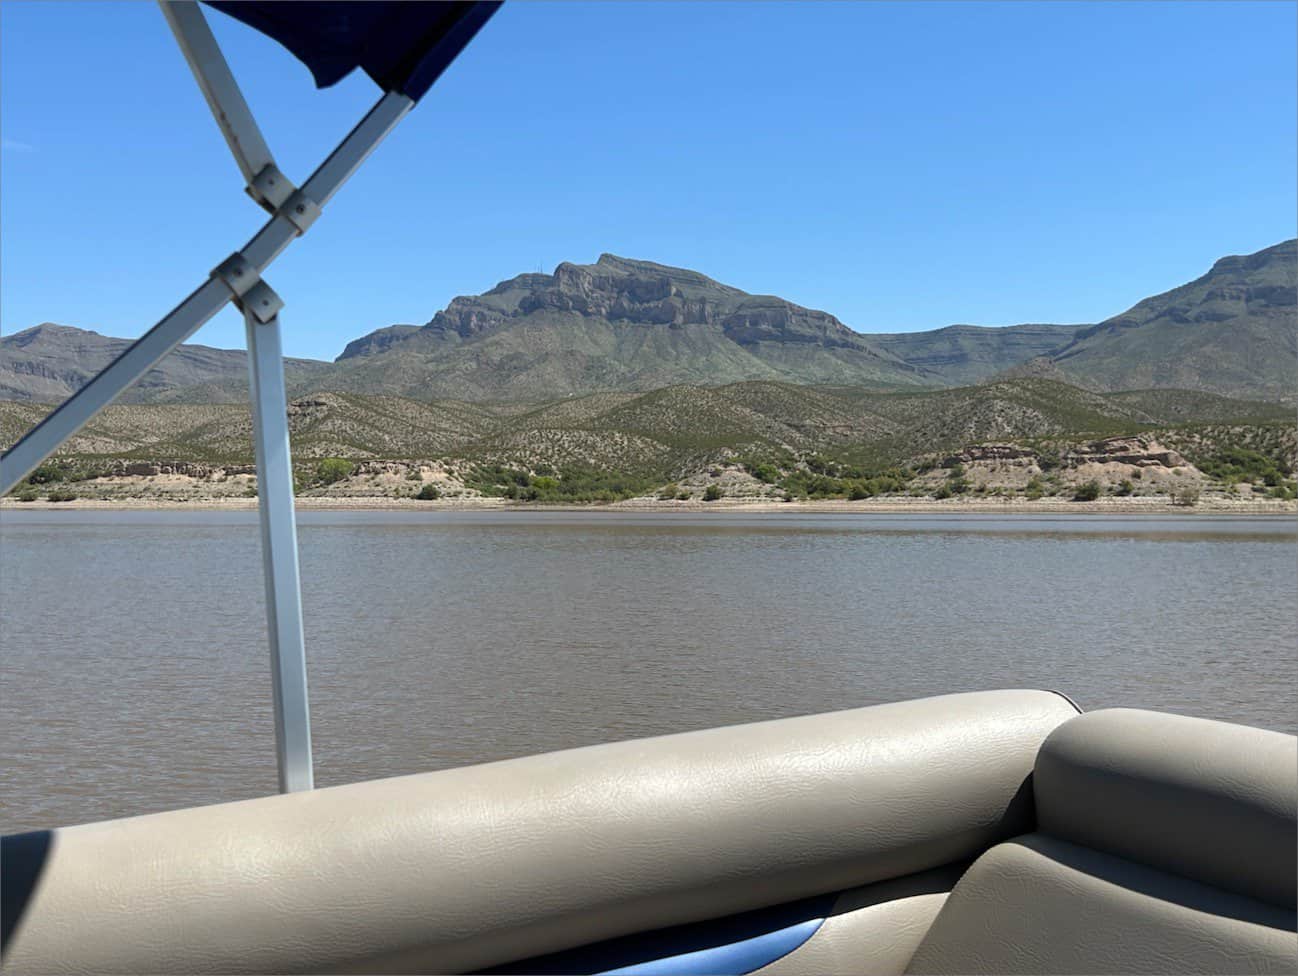 A boat on Caballo Lake with mountains in the background at State Park.